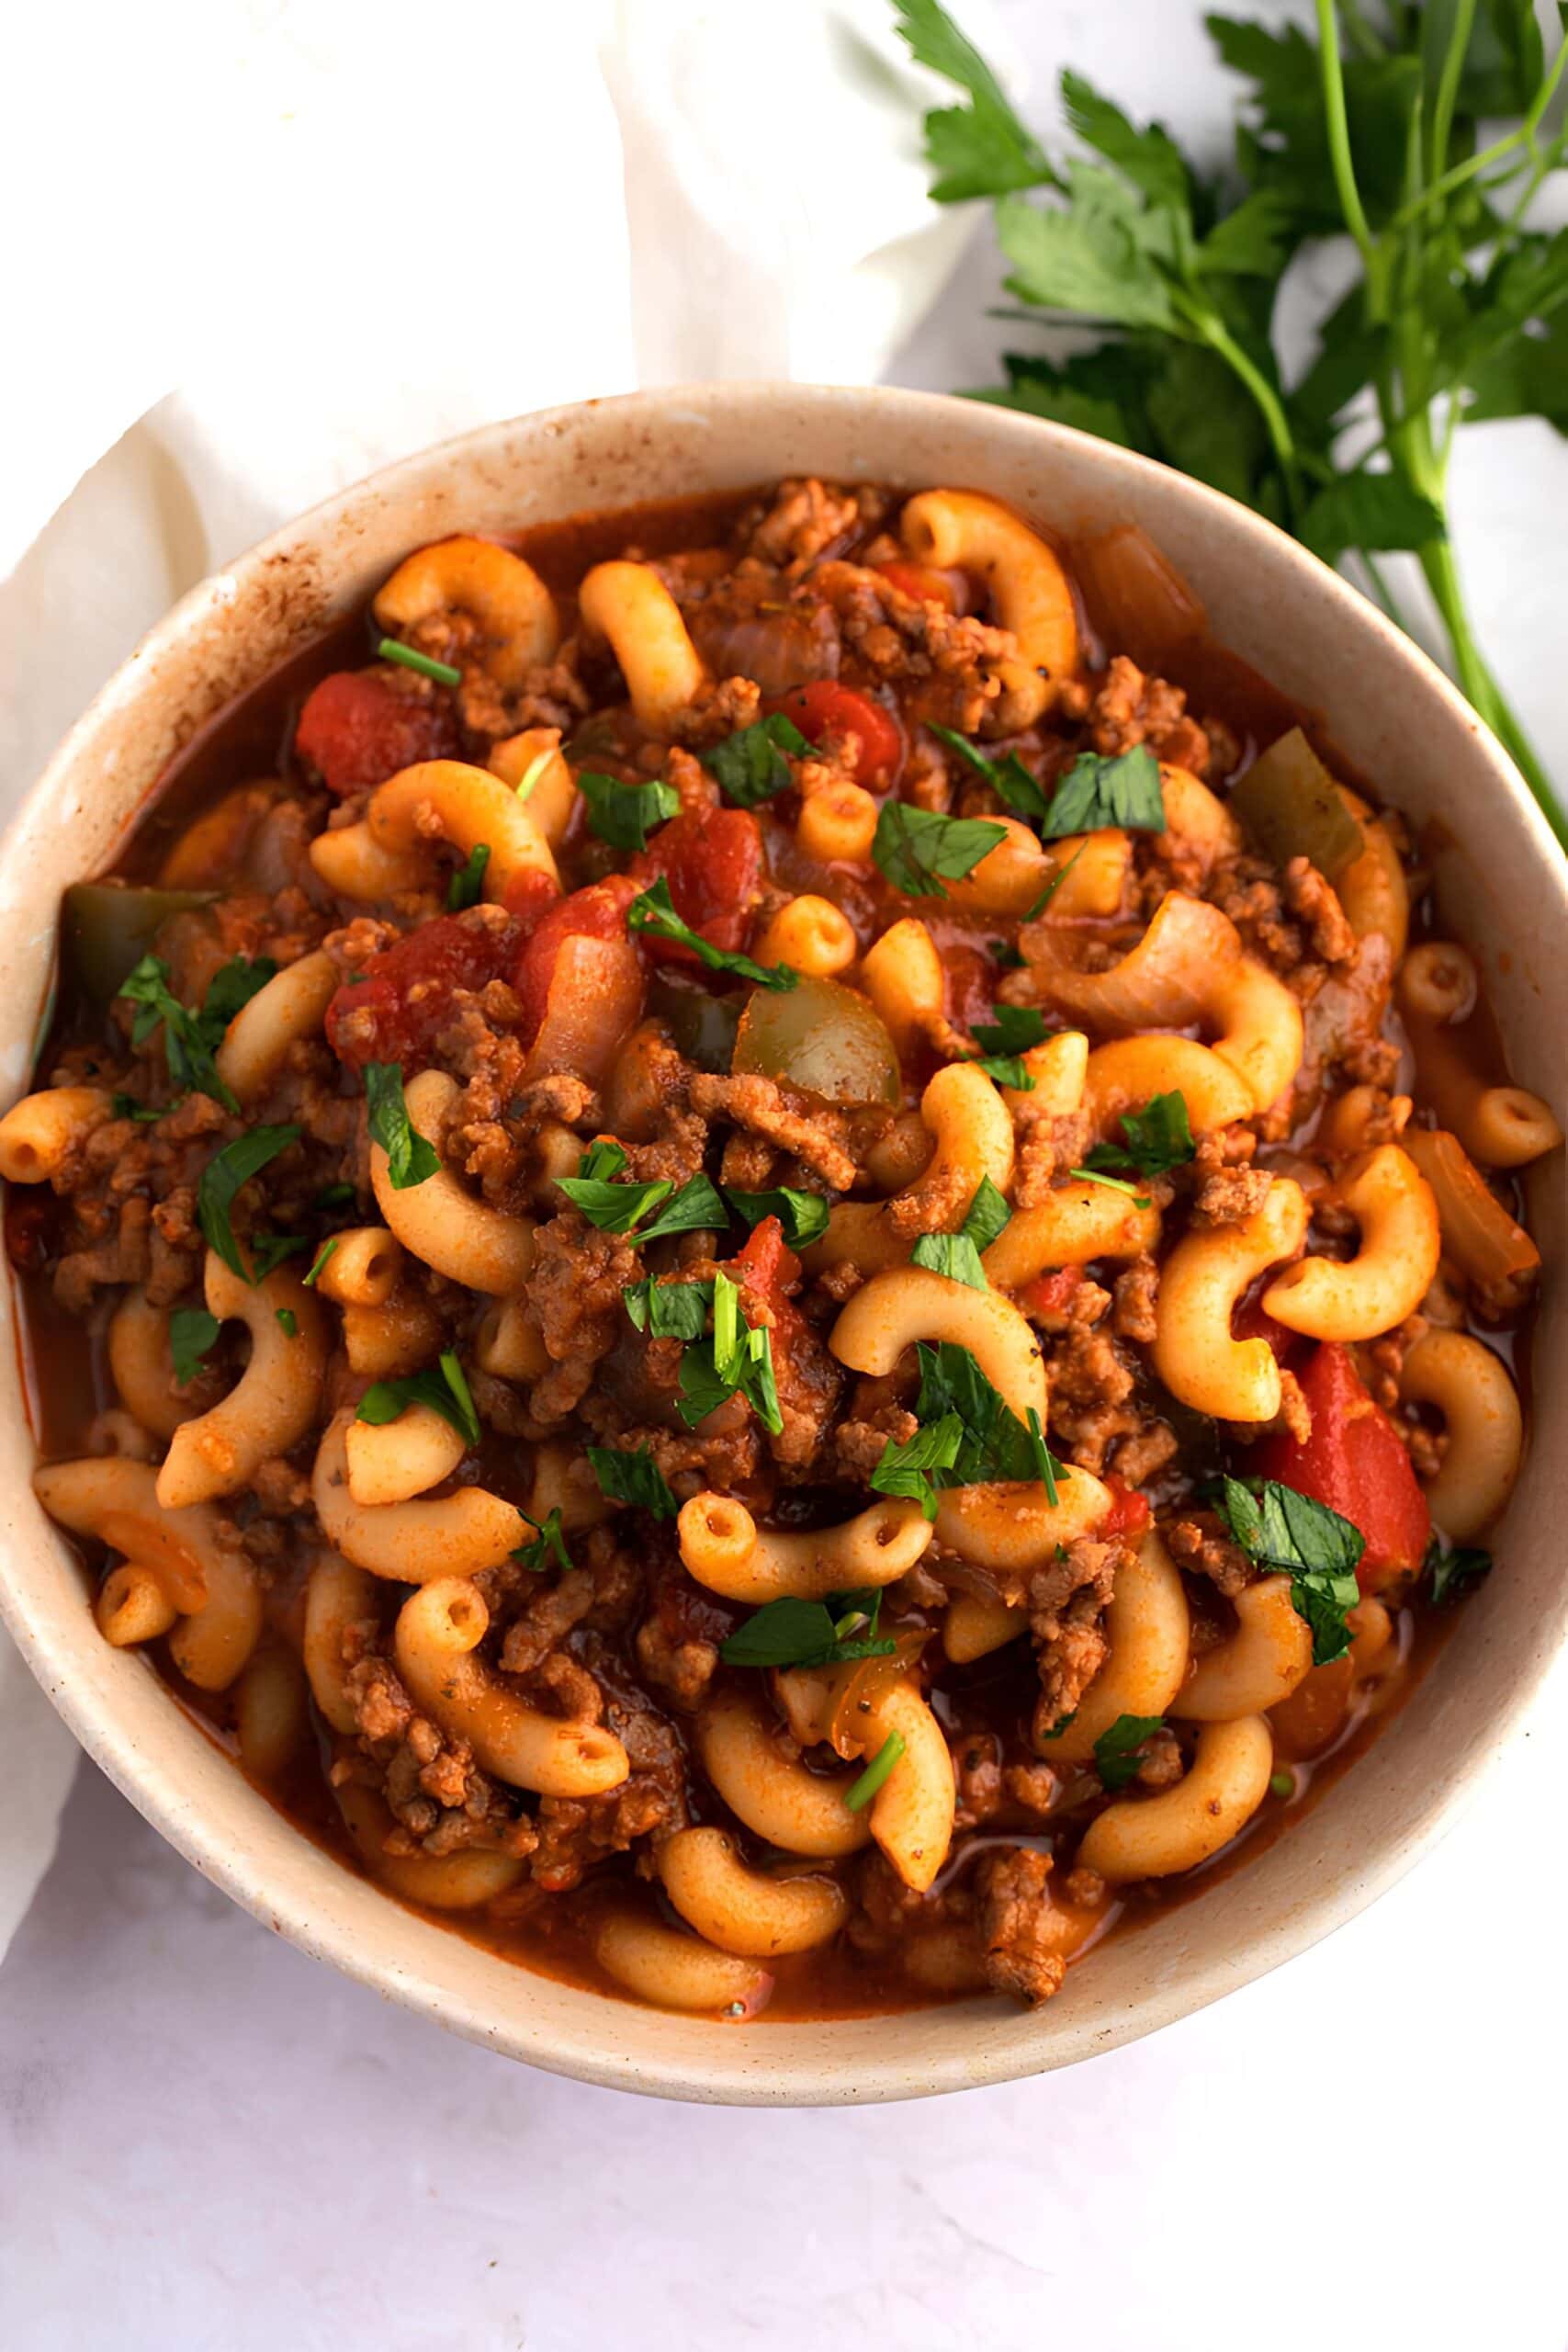 American Goulash in a Bowl with Tomatoes, Herbs and Ground Beef